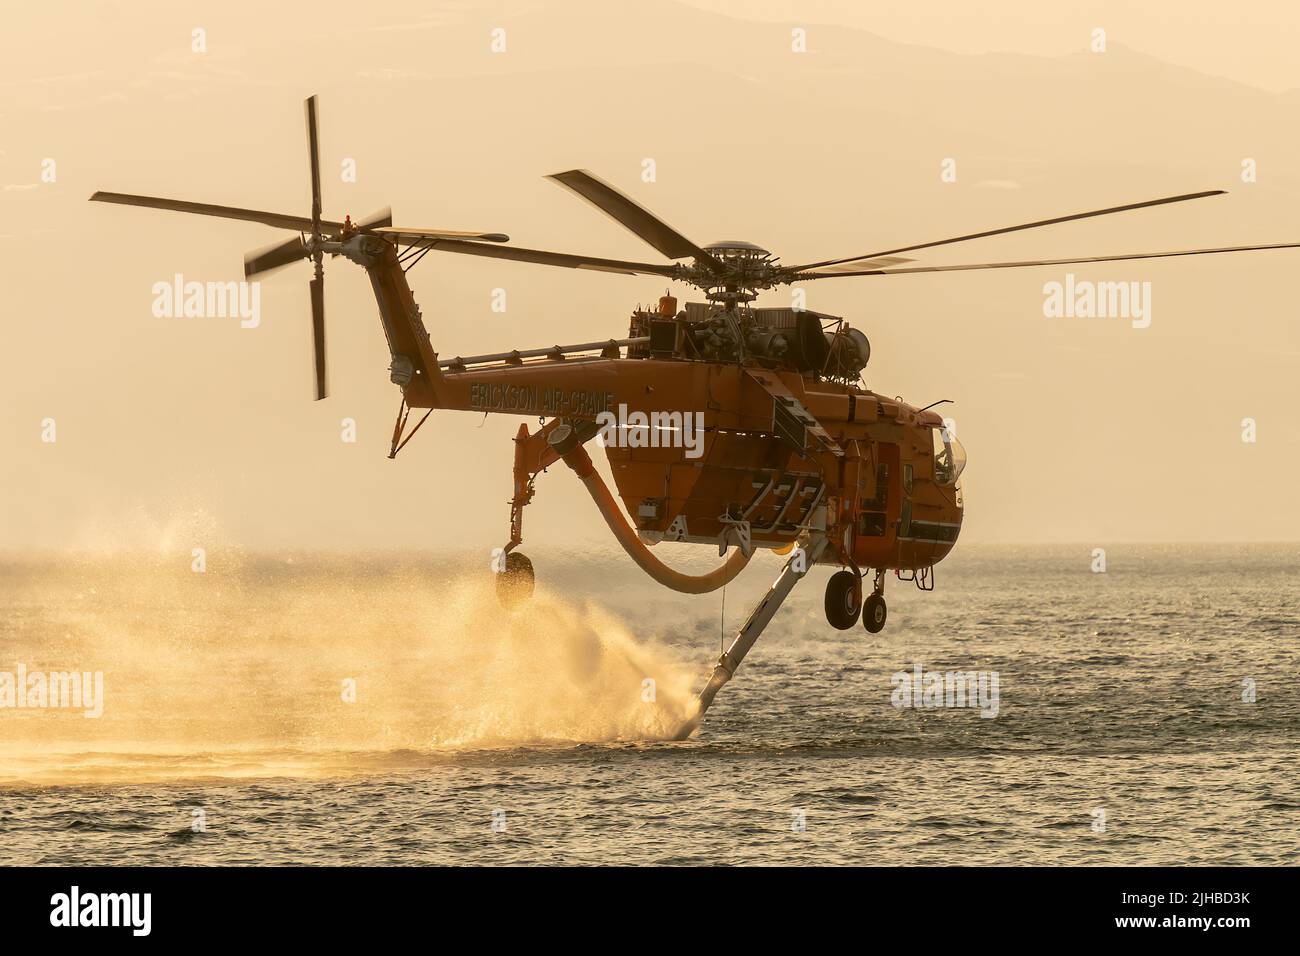 Loutraki, Greece 14 September 2019. Fire helicopter at Loutraki in Greece for the big fire gathering water against the sunset. Close up view. Stock Photo